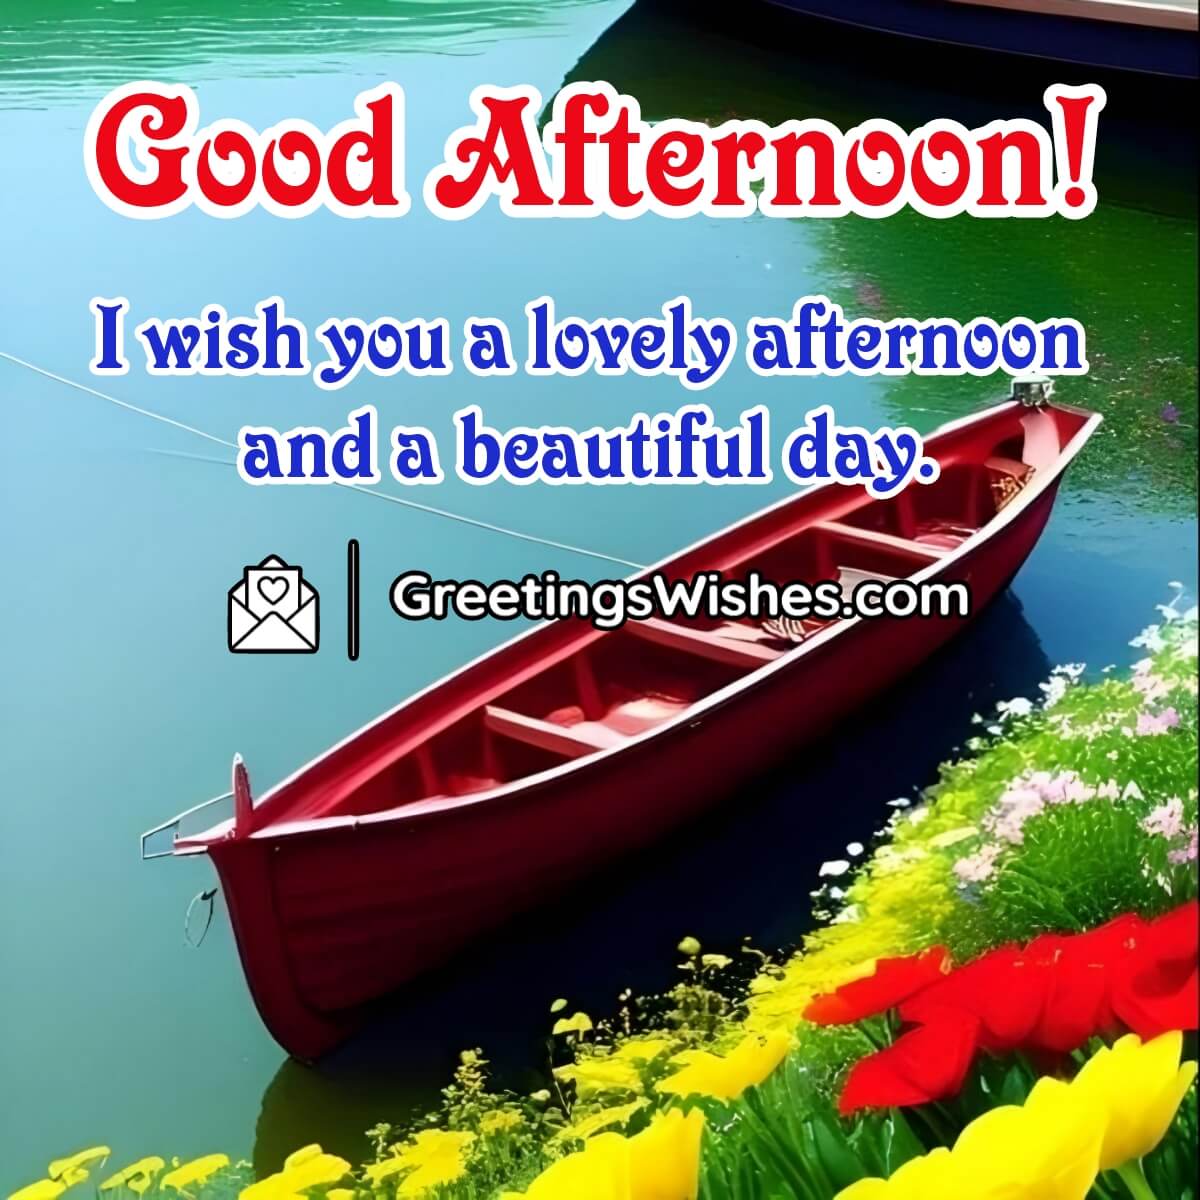 Good Afternoon Messages - Greetings Wishes